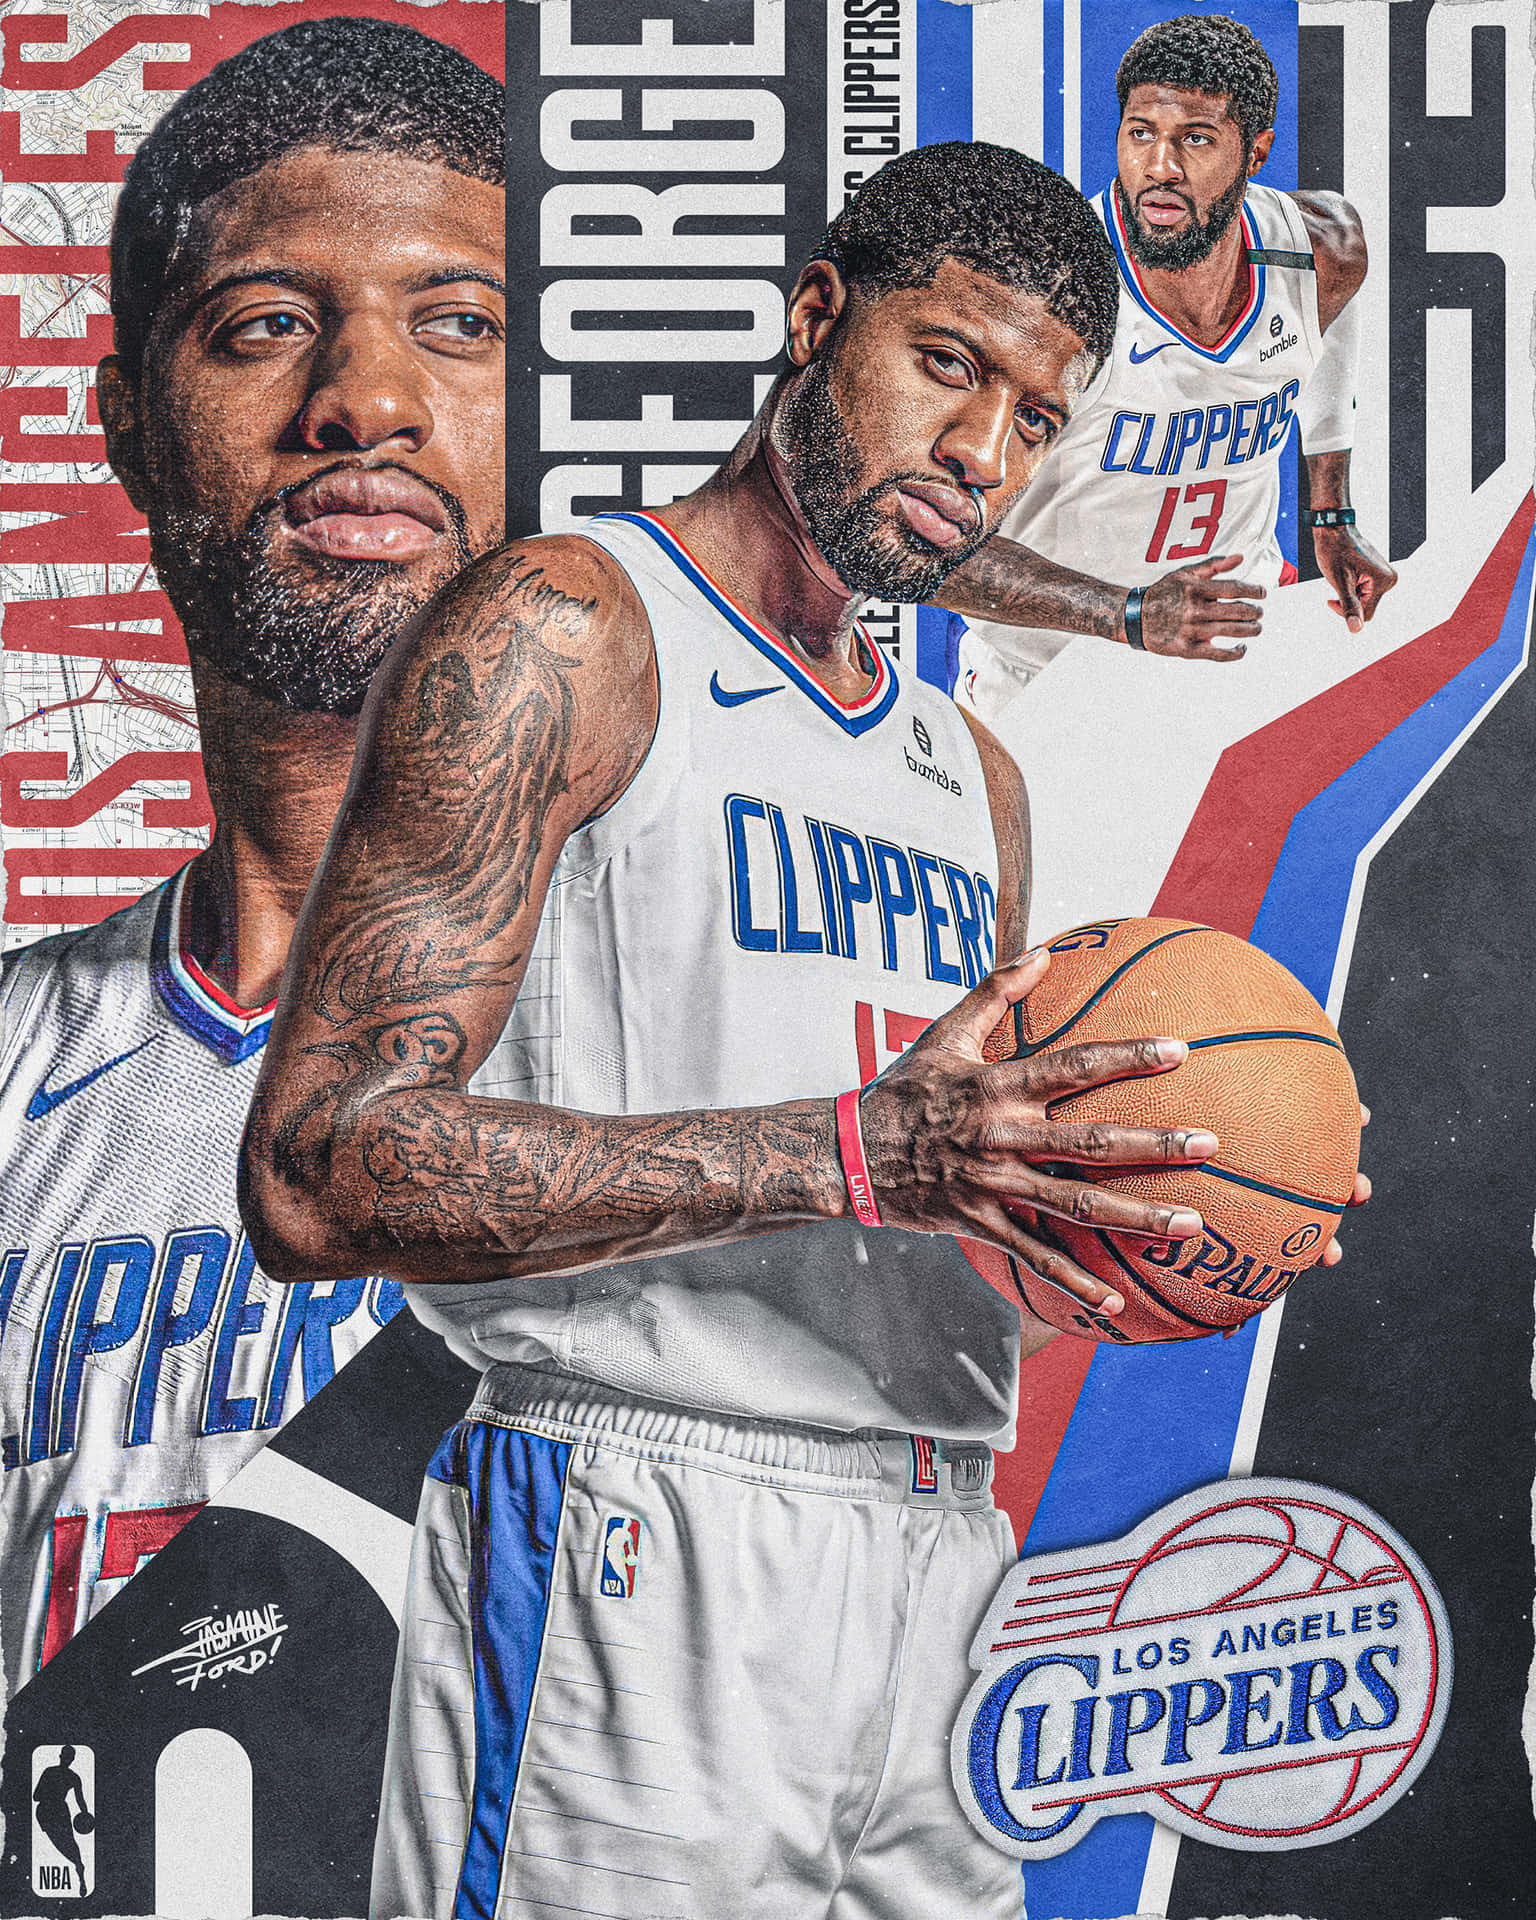 Free Paul George Clippers Wallpaper Downloads, Paul George Clippers Wallpaper for FREE